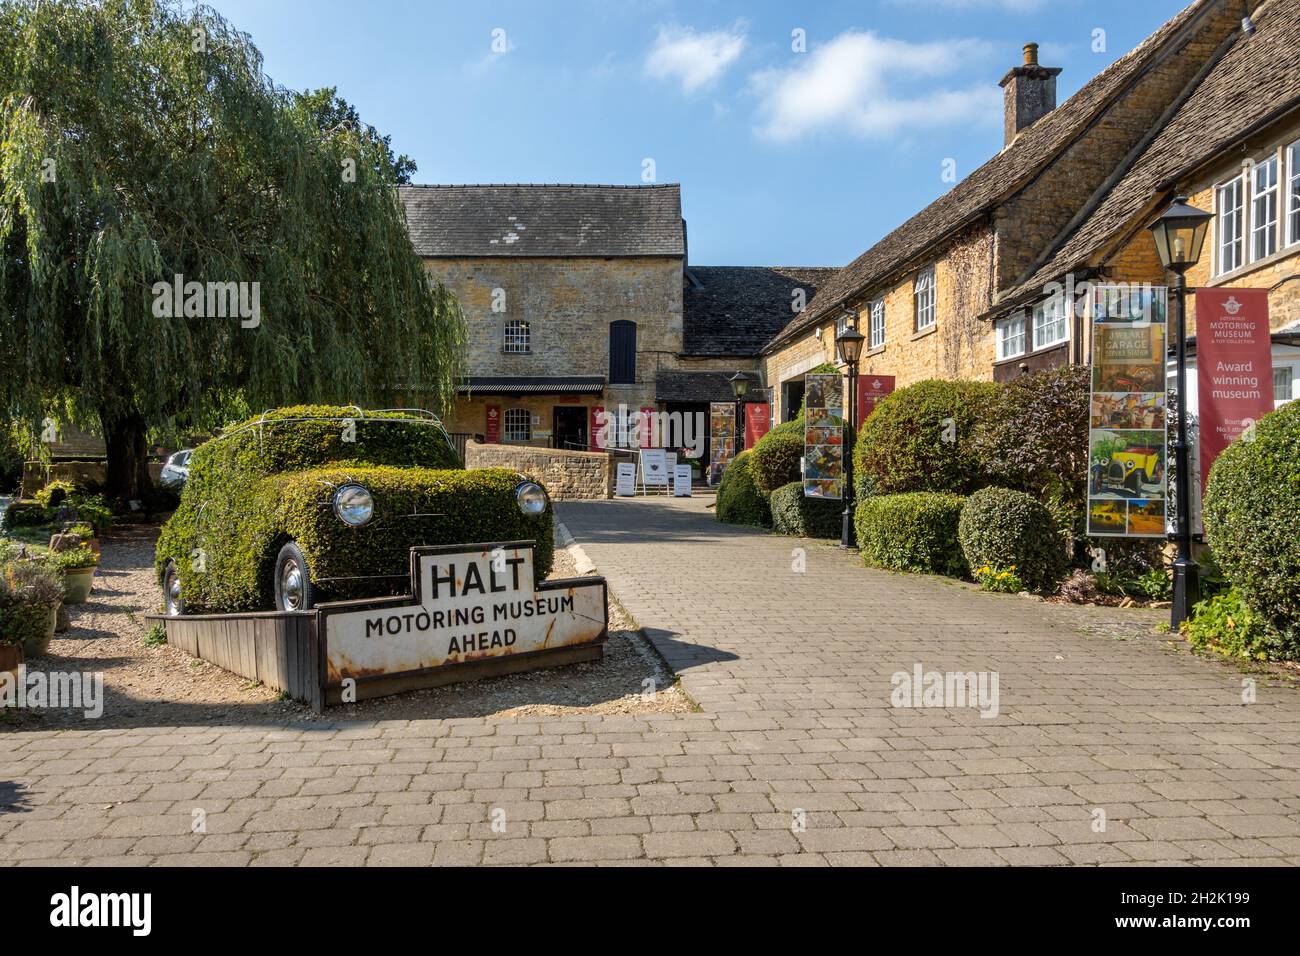 Das Cotswold Motoring Museum am River Windrush in Bourton-on-the-Water in den Cotswolds, Gloucestershire, England. Stockfoto